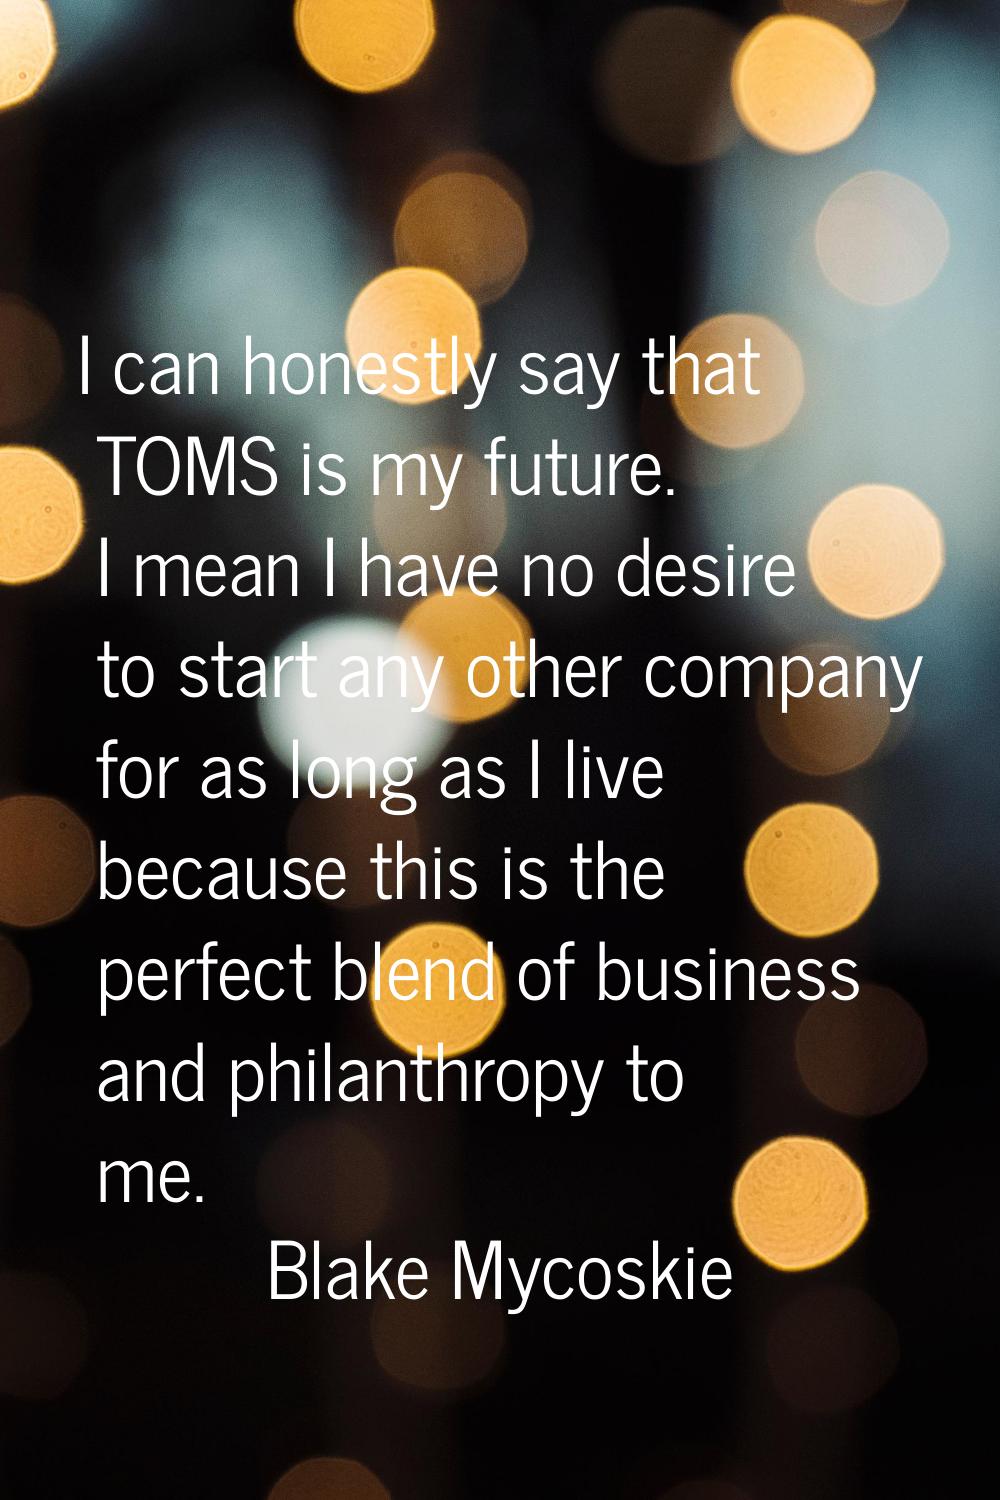 I can honestly say that TOMS is my future. I mean I have no desire to start any other company for a